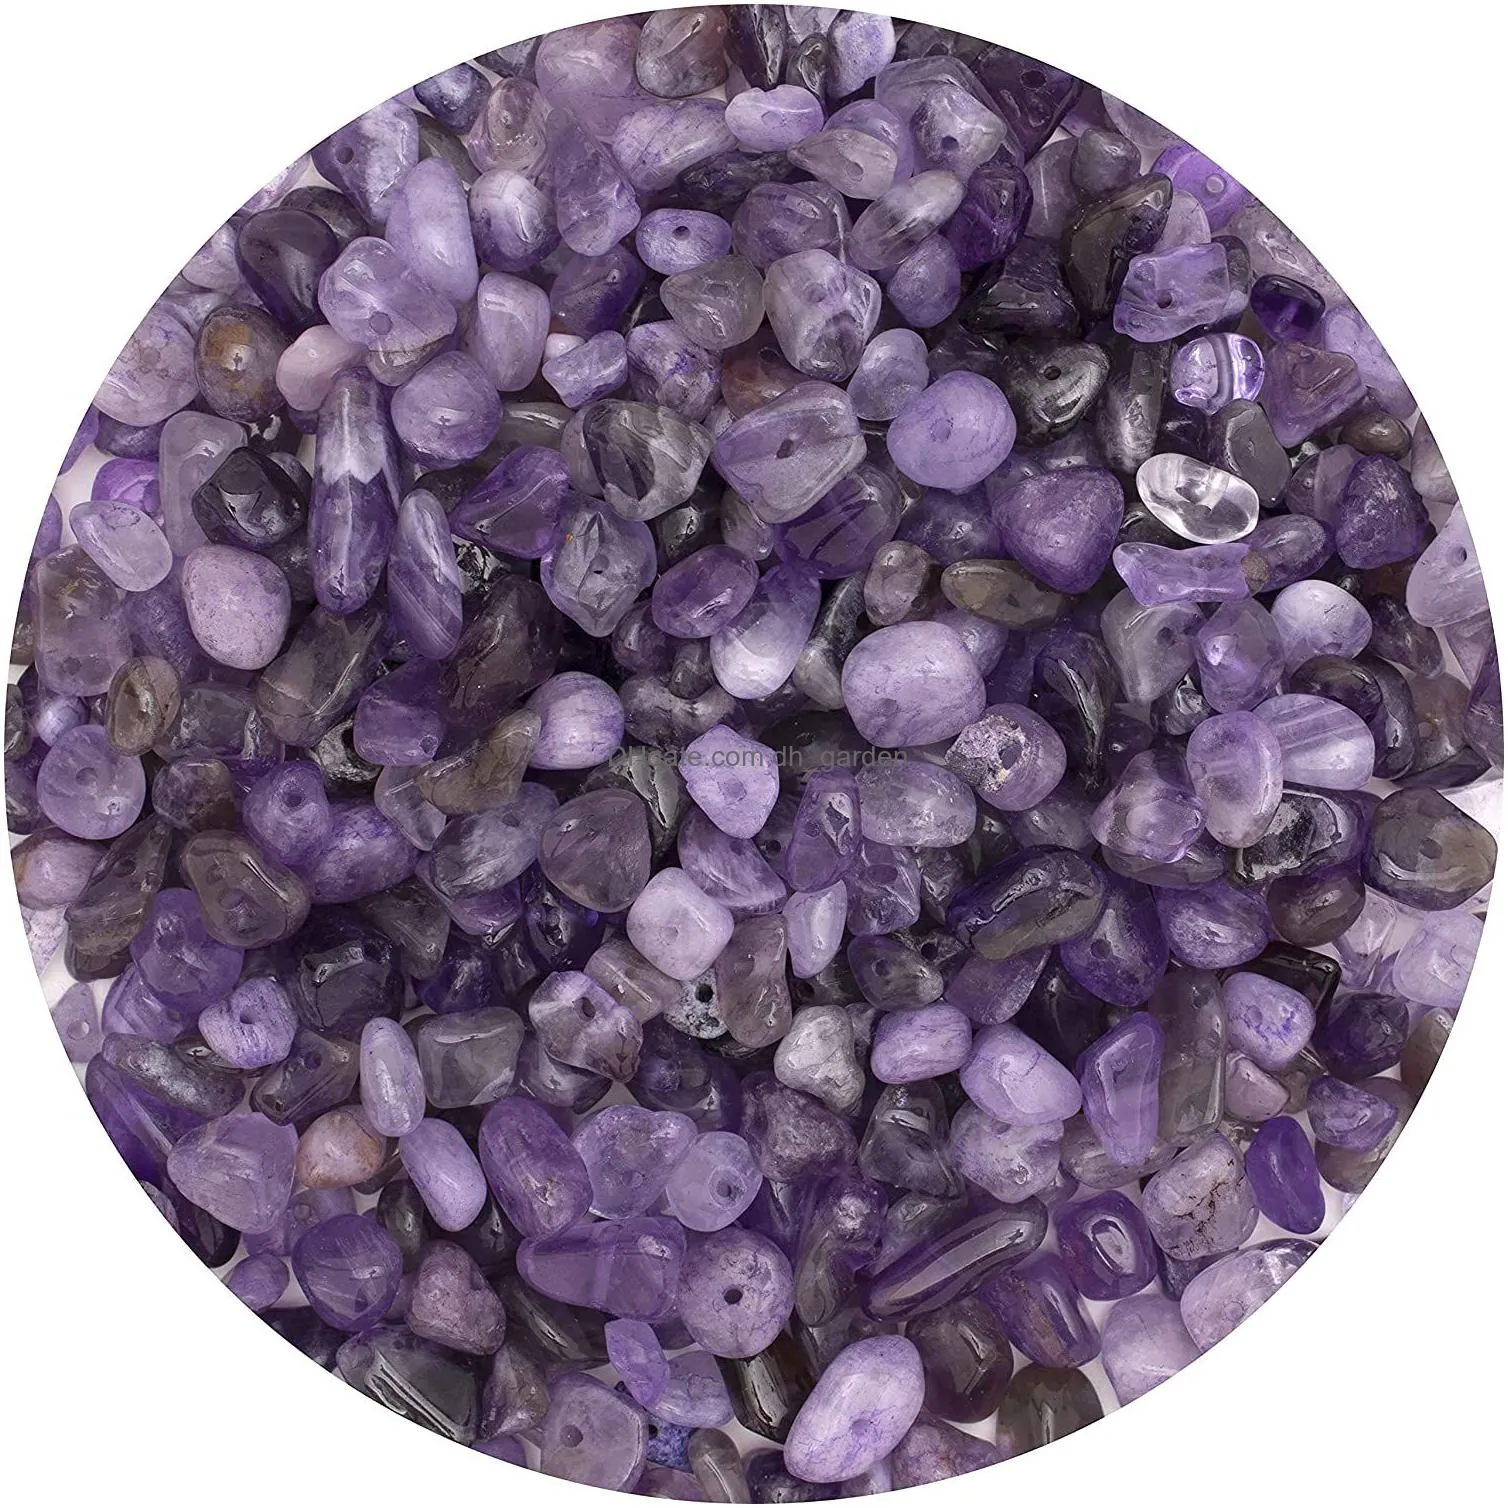 loose natural chips crystal beads for jewelry making drilled polishd irregular raw rock stone healing gemstone strands 32 inches